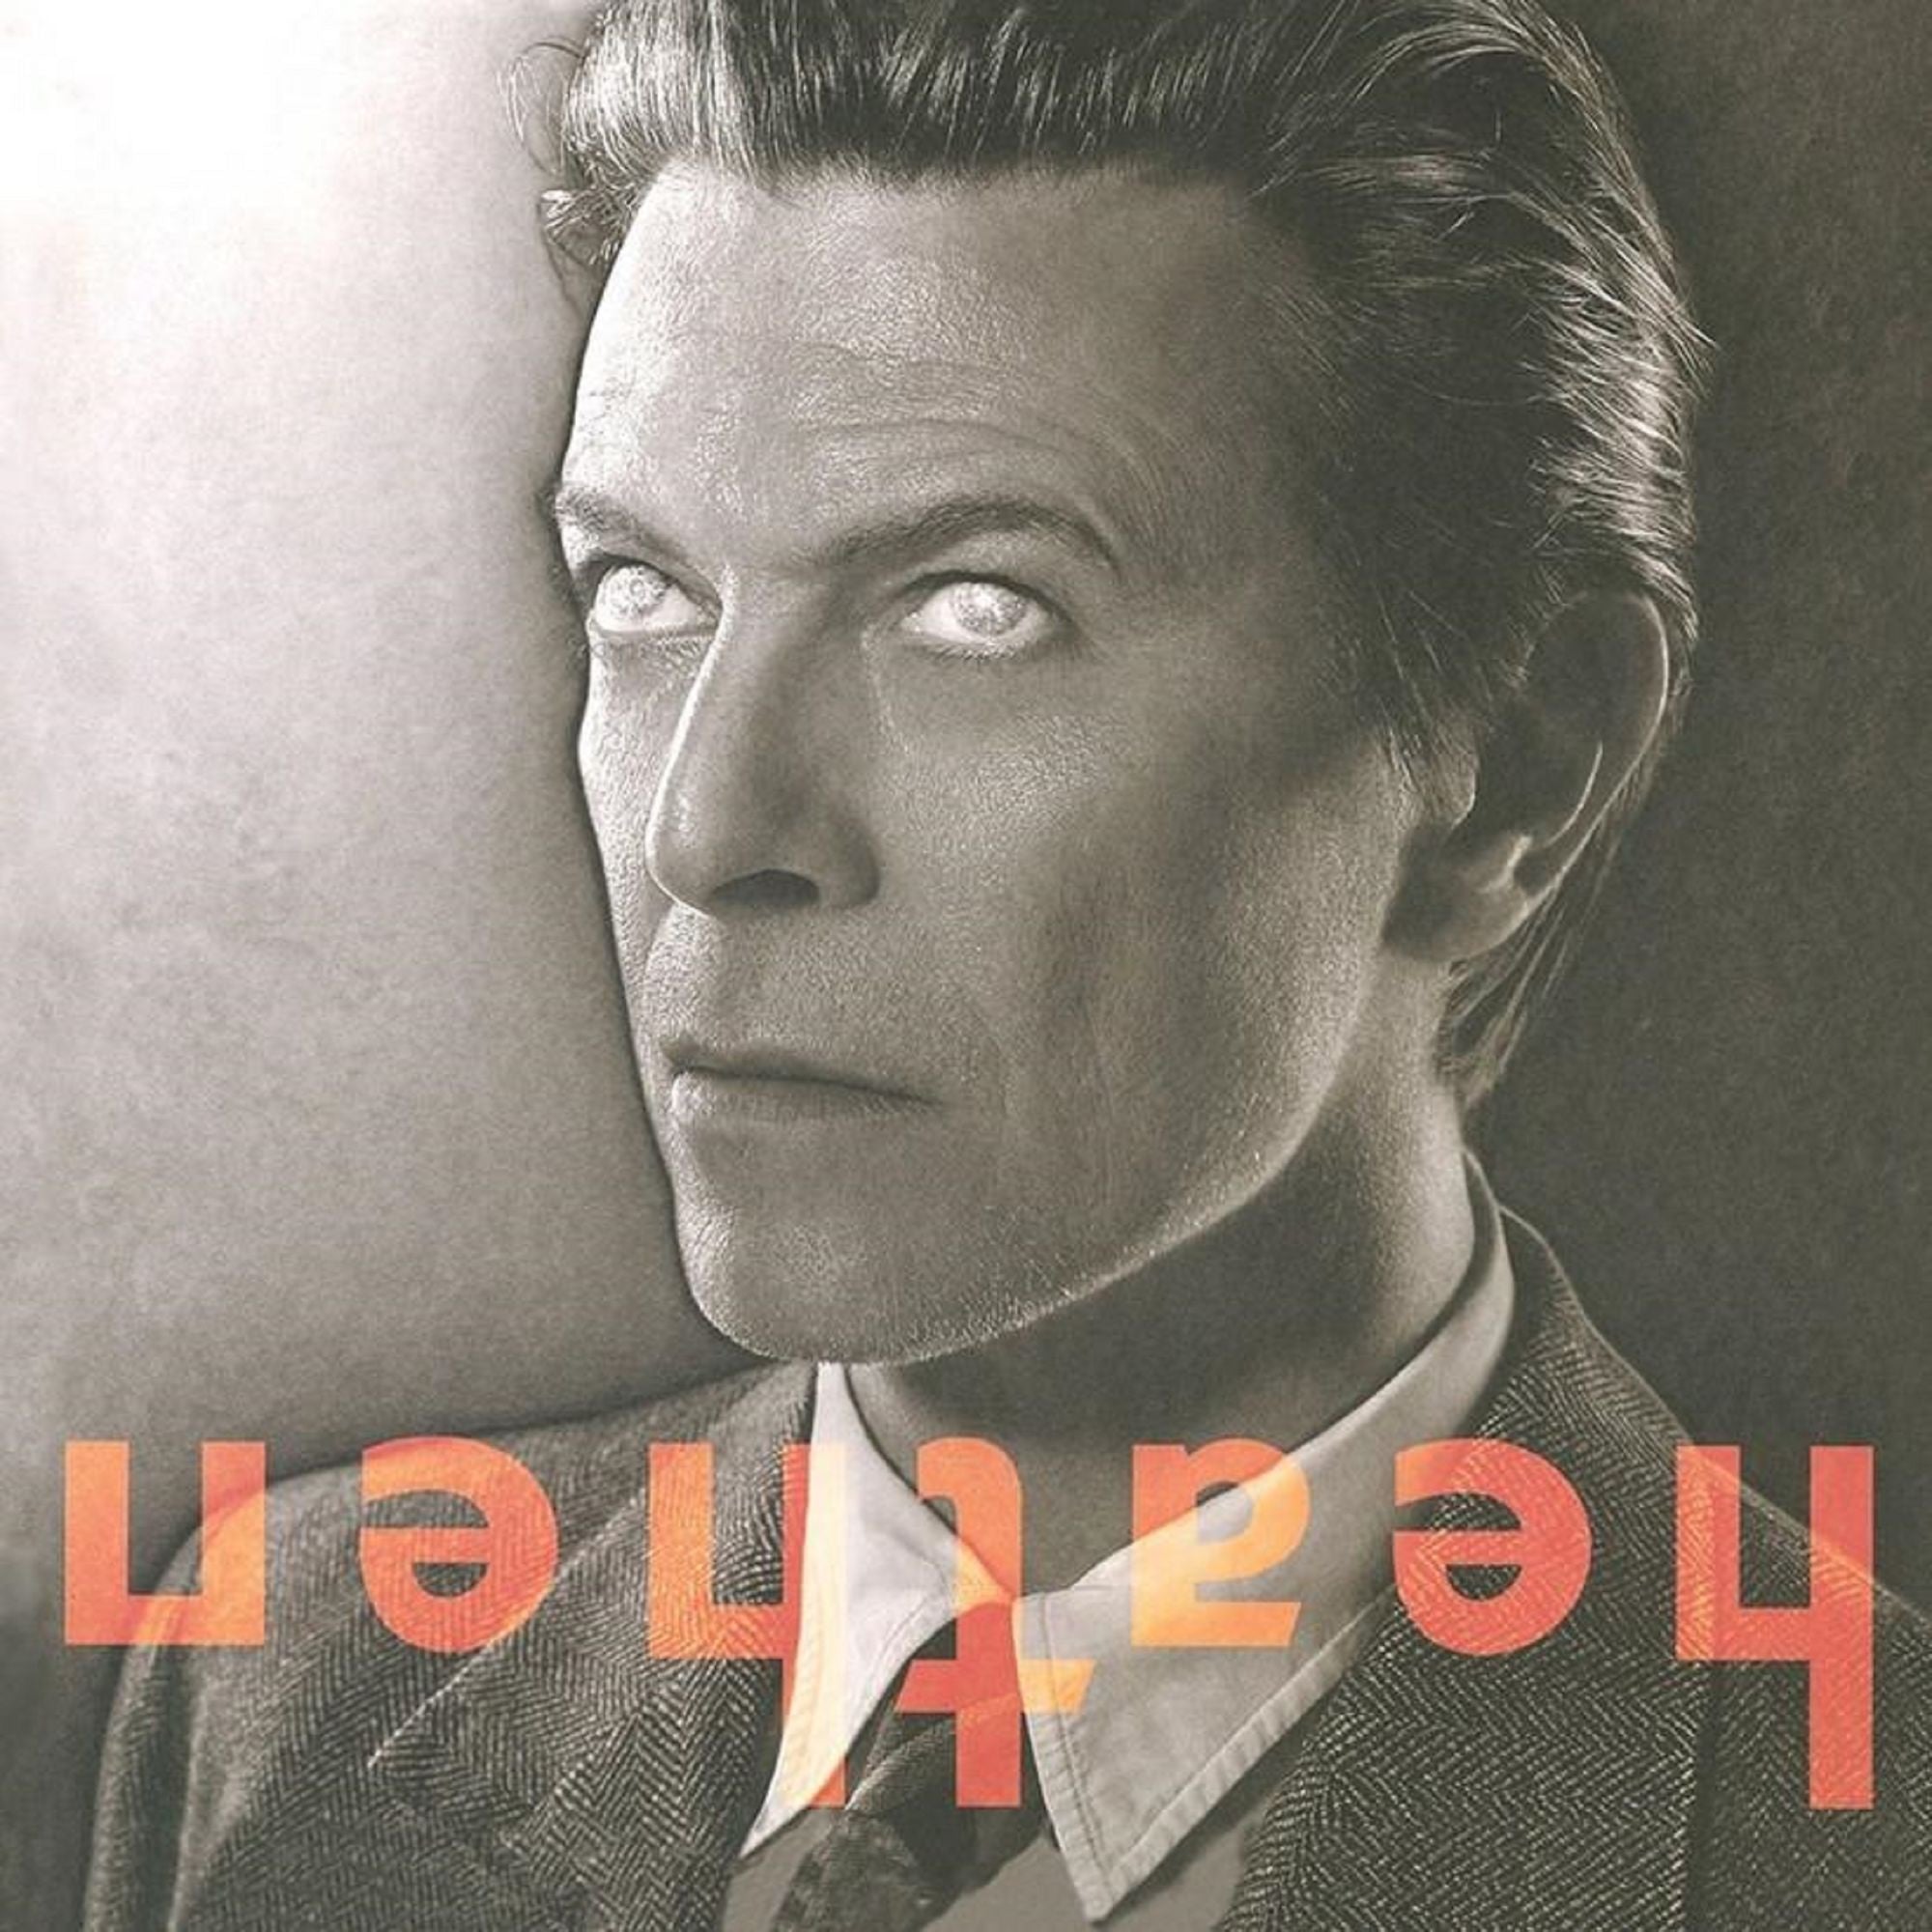 David Bowie - Heathen - New Vinyl Lp 2018 Friday Music Limited Edition 180gram Audiophile Reissue on Brown, White & Gray Swirl Vinyl with Tri-Fold Cover - Art Rock